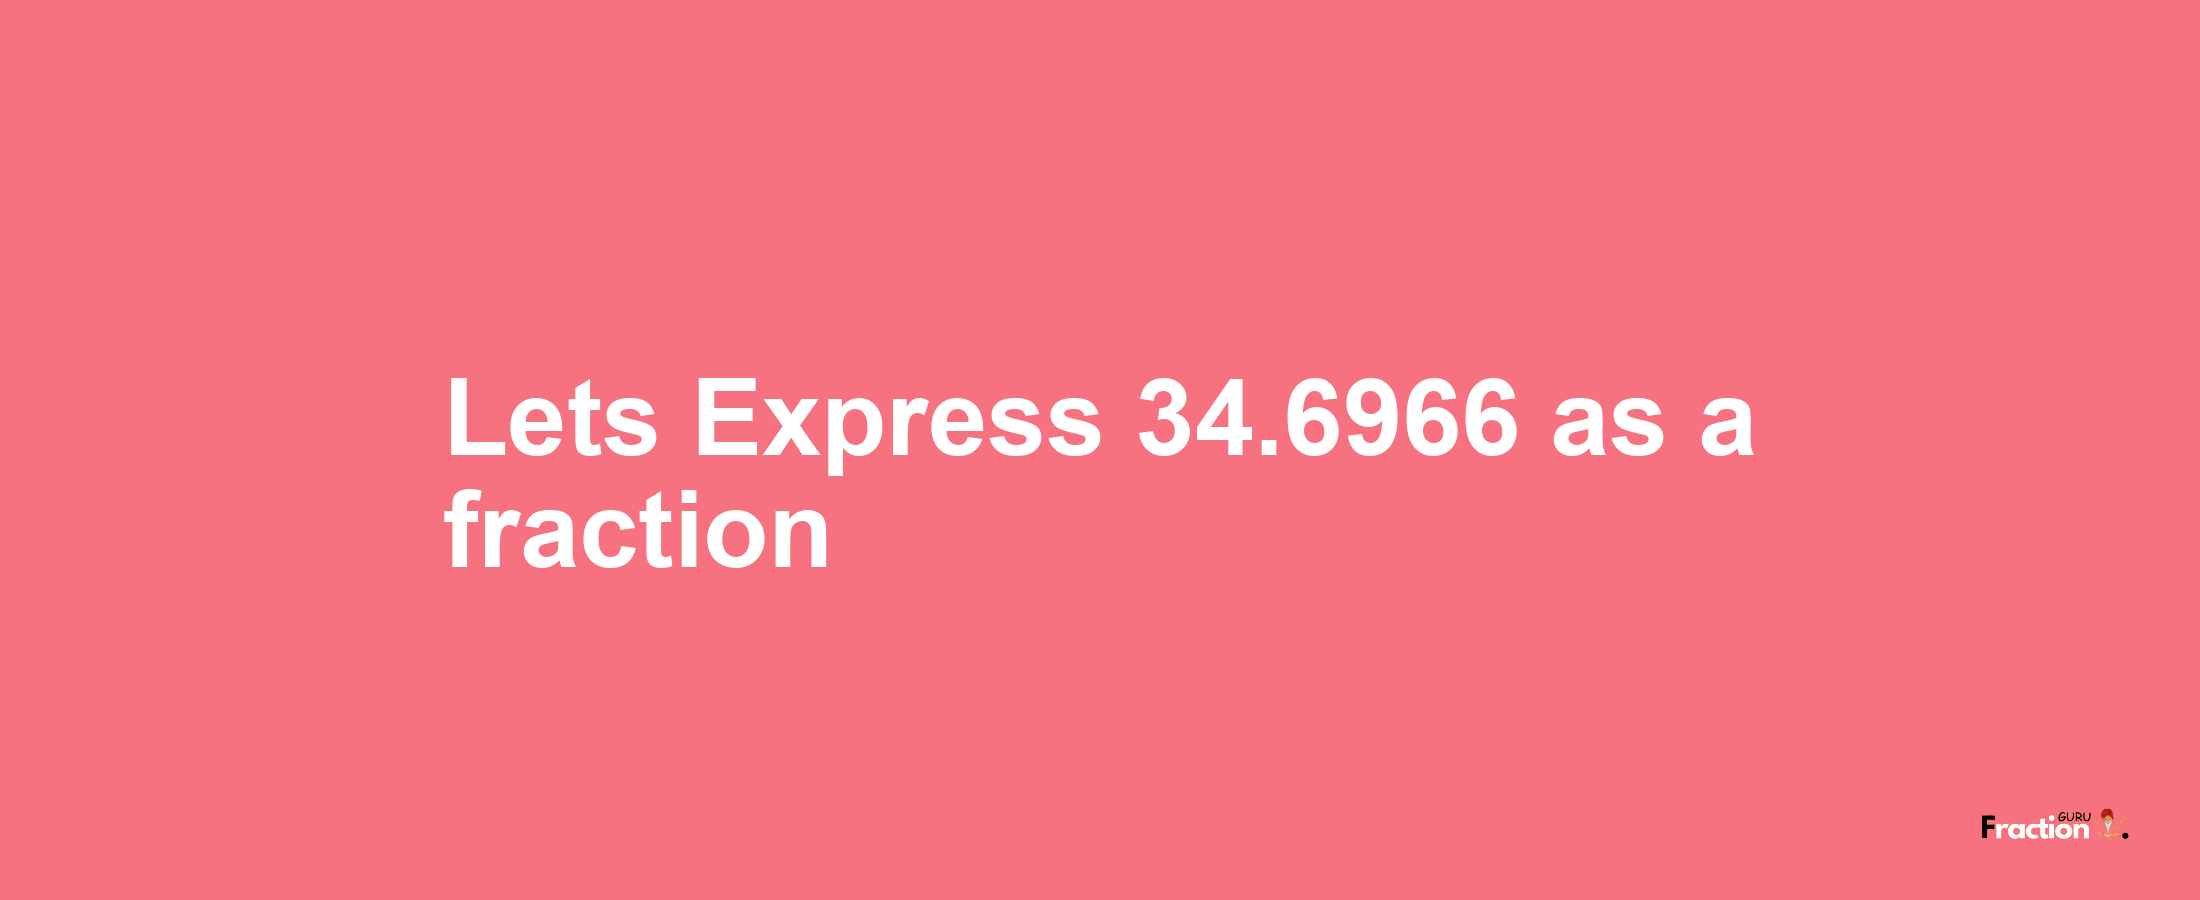 Lets Express 34.6966 as afraction